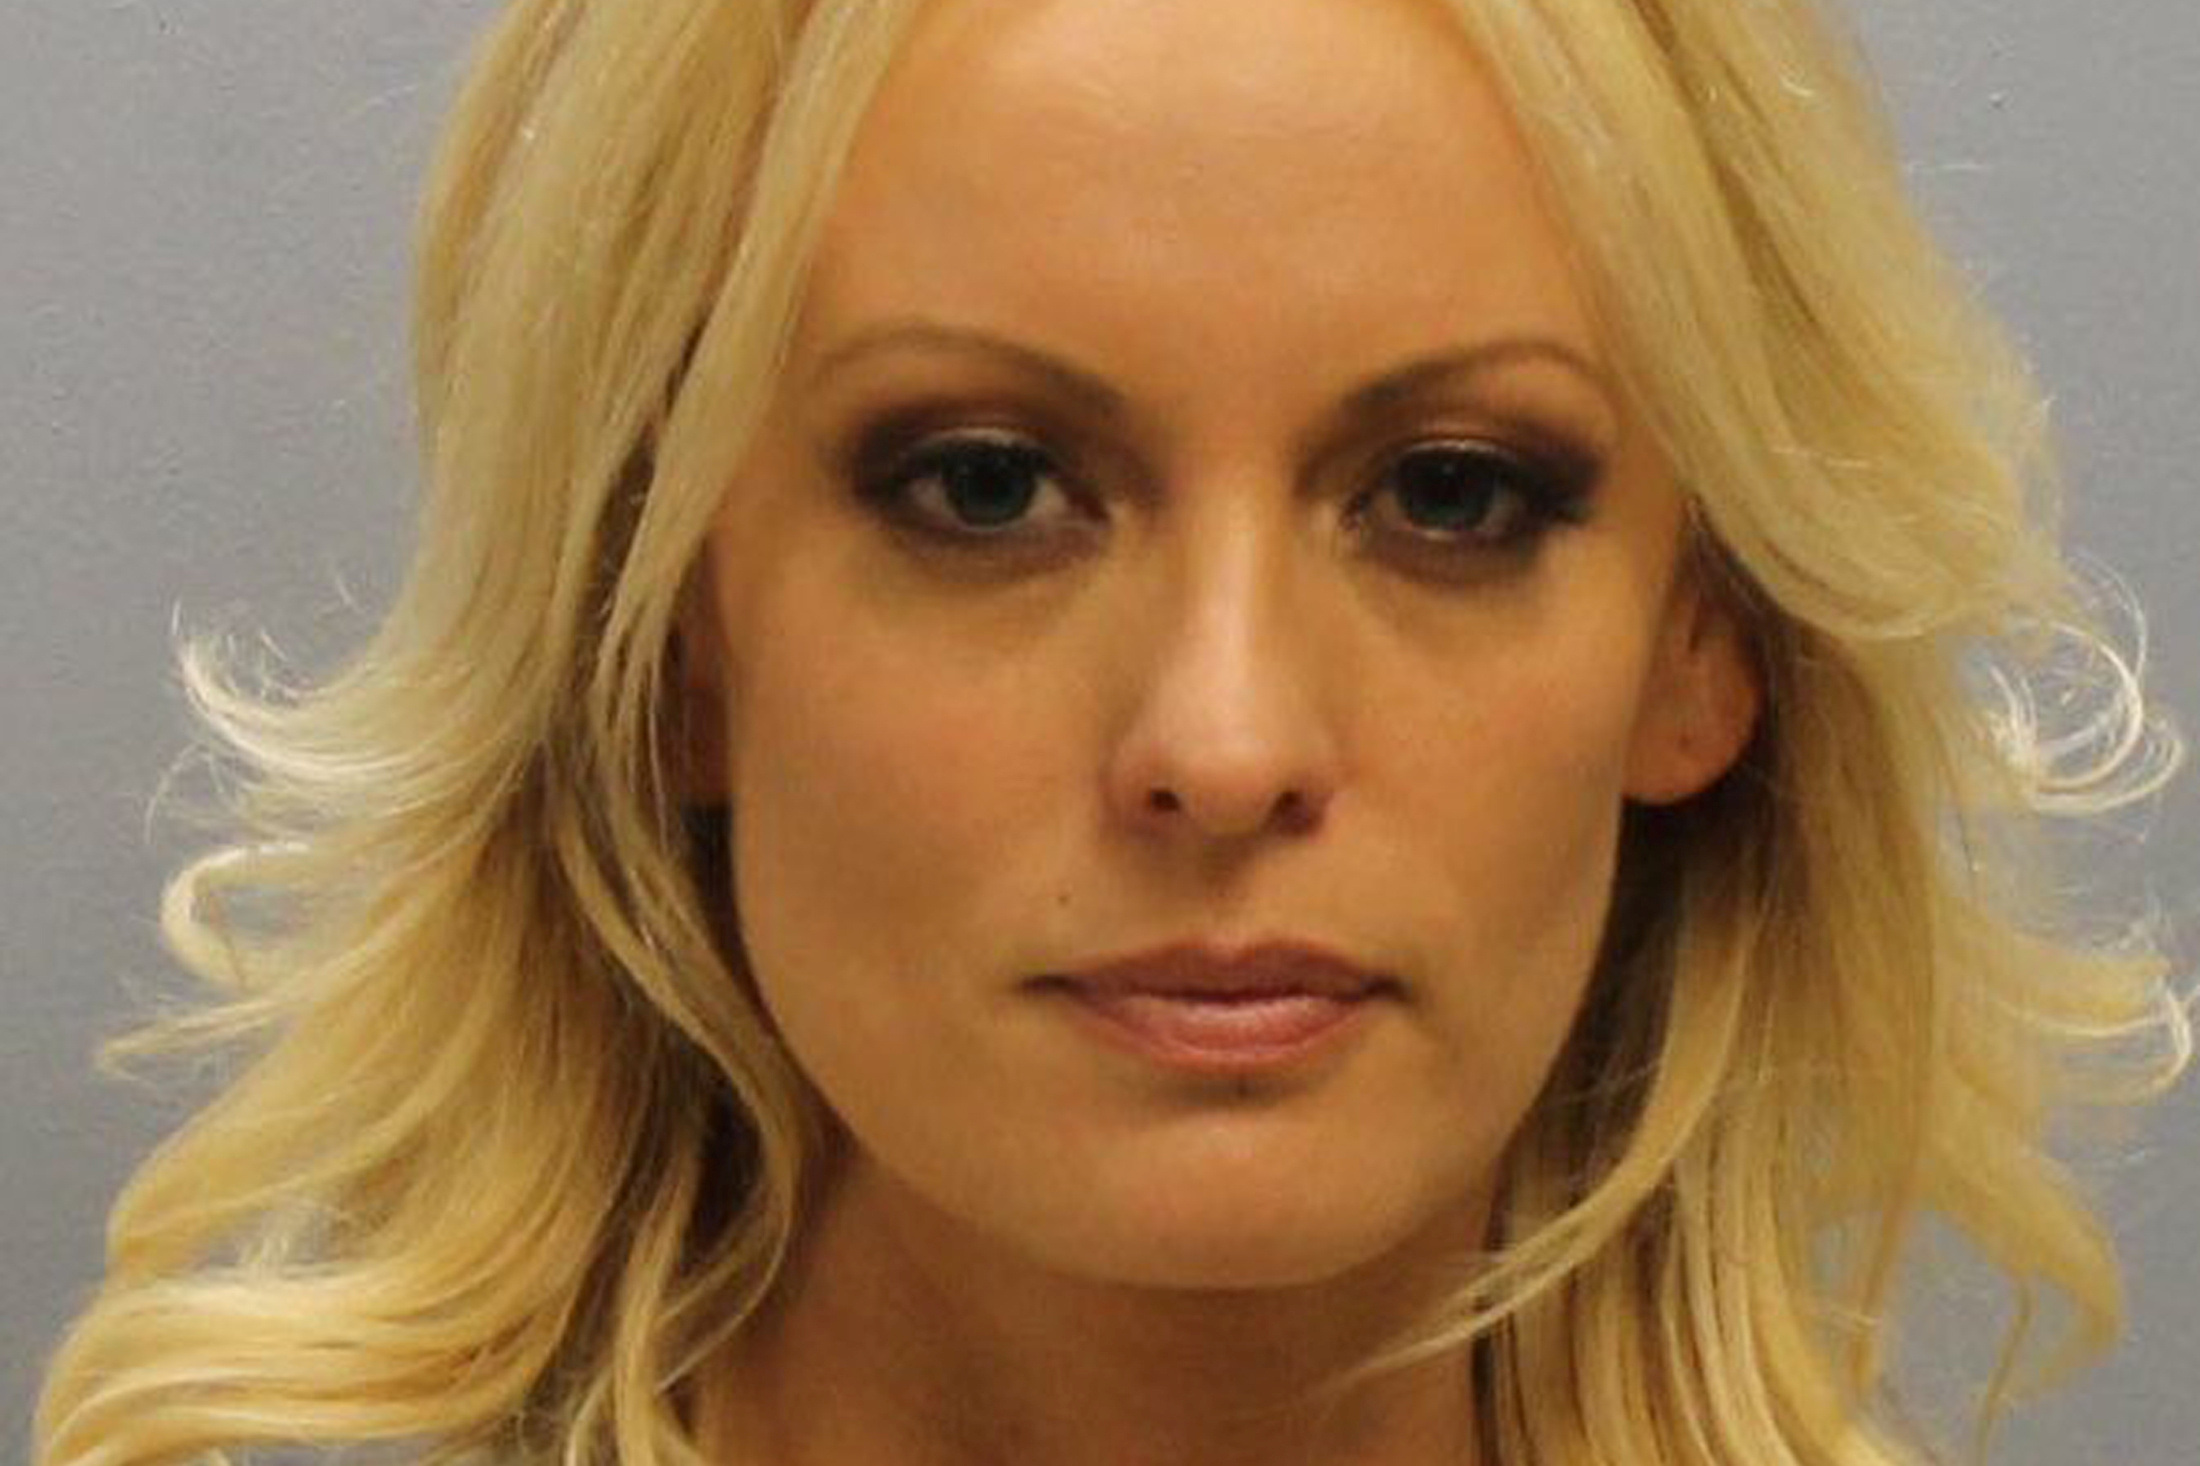 Franklin County Sheriff's Office booking photo of Stephanie Clifford also known as Stormy Daniels